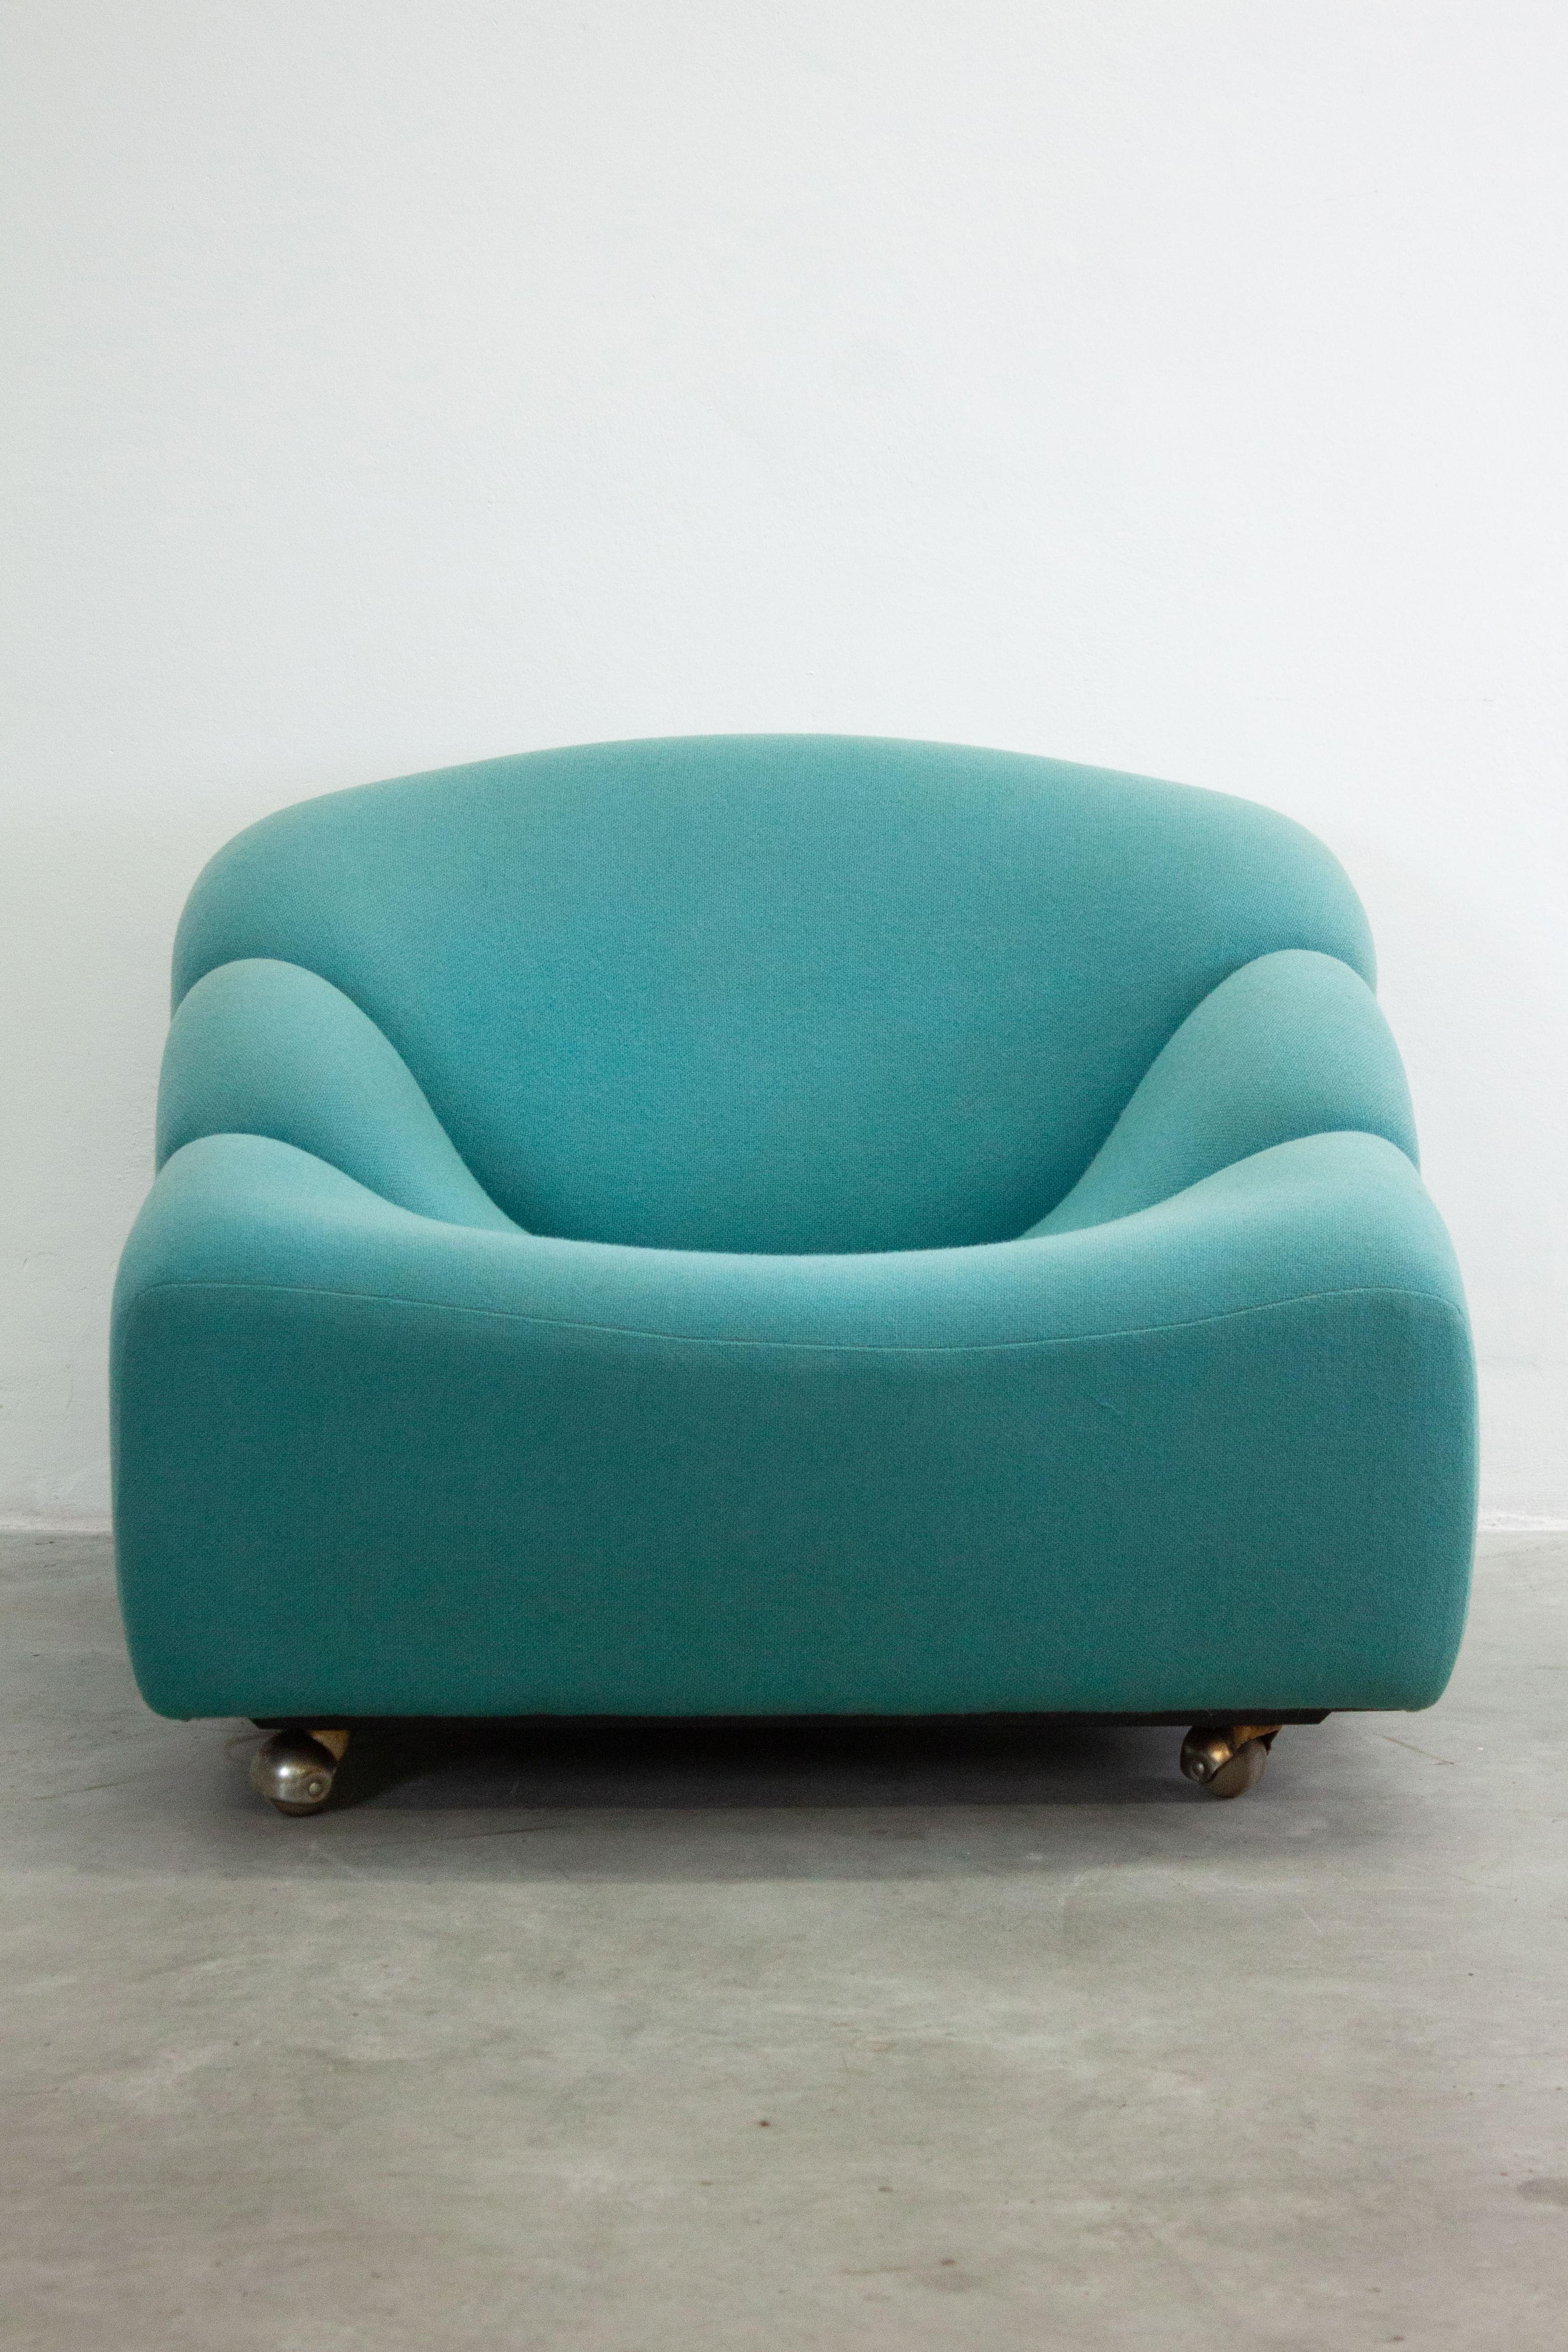 RARE Artifort ABCD Lounge Chair desigend by Pierre Paulin in 1968. In it's original upholstery in this beautiful teal color. In great vintage condition with normal signs of wear as can be seen in the pictures.